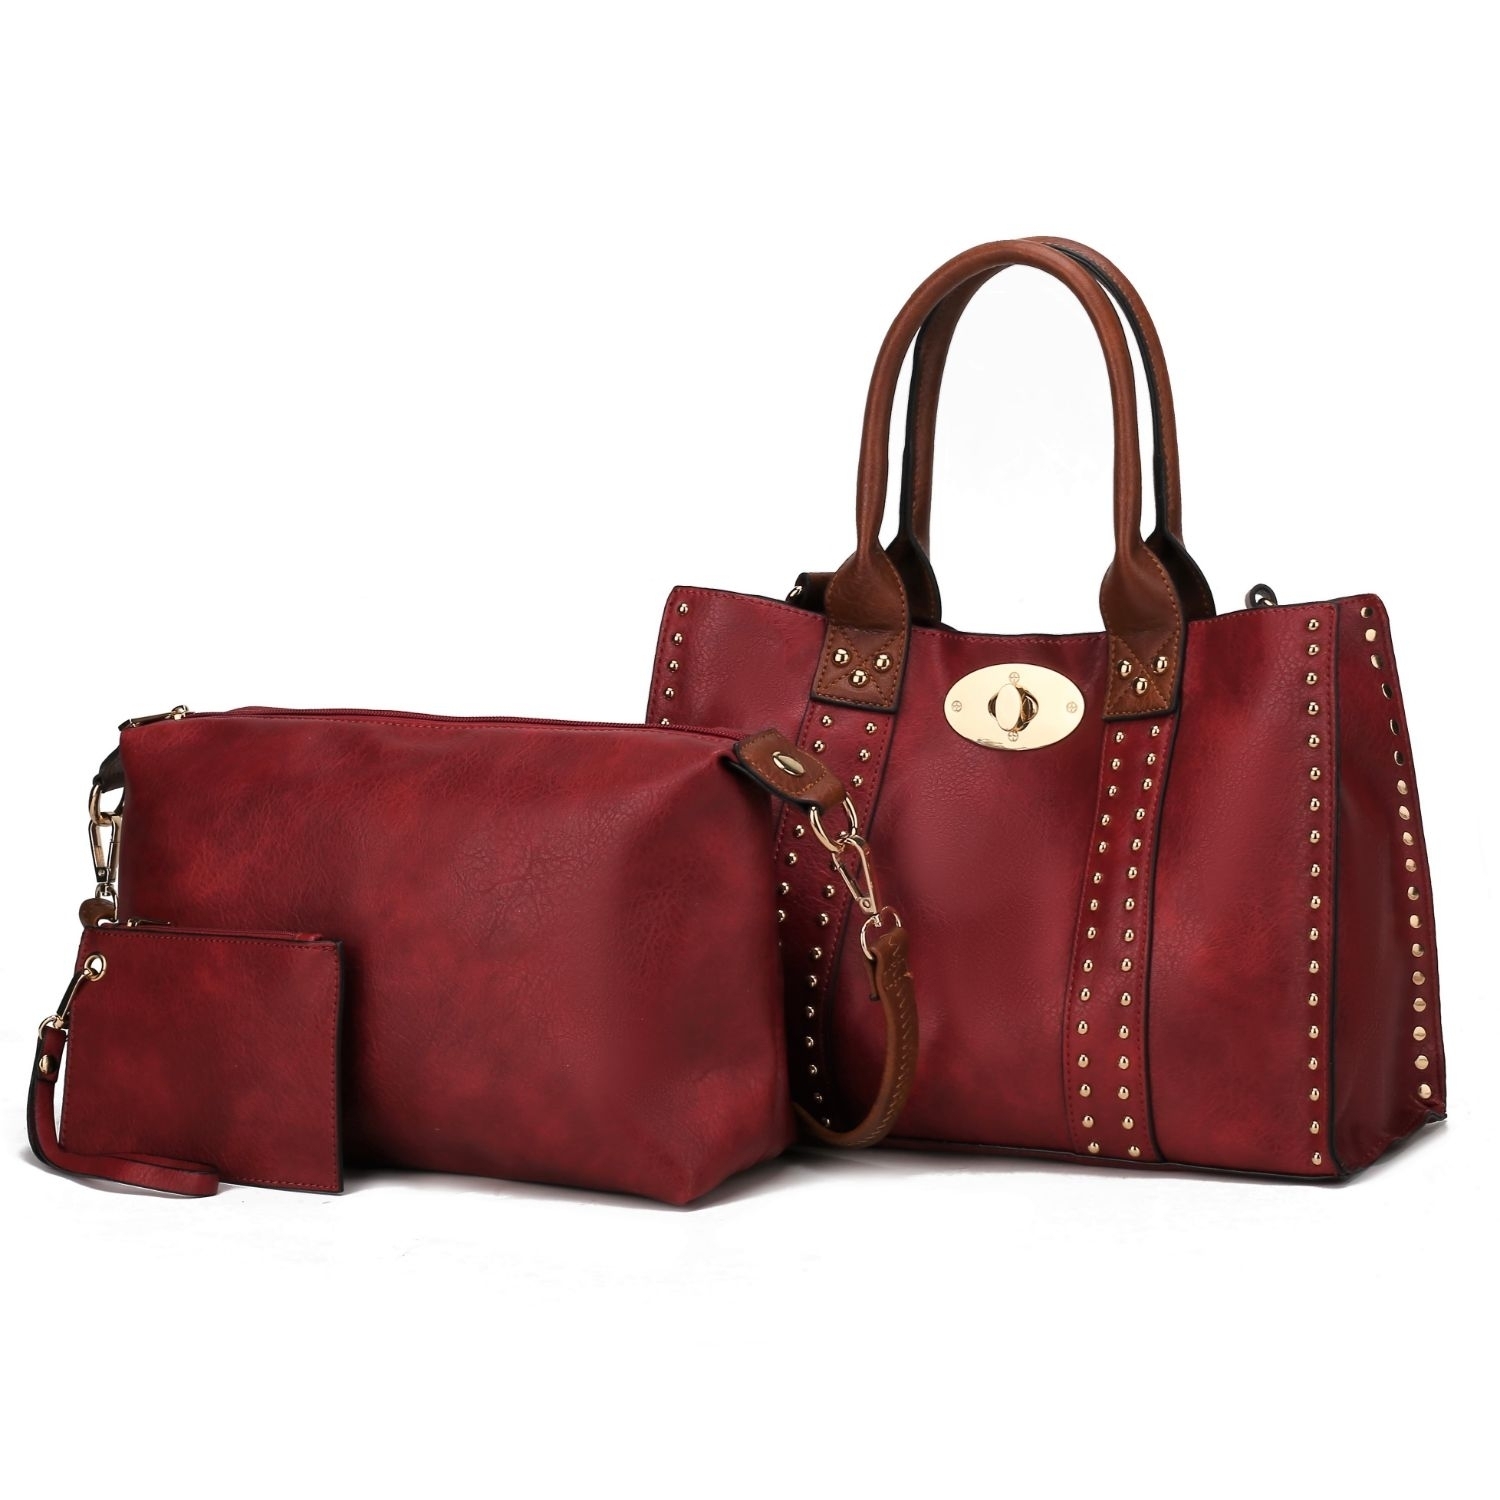 MKF Collection Elissa 3 Pc Set Satchel Handbag With Pouch & Coin Purse By Mia K. - Red-brown